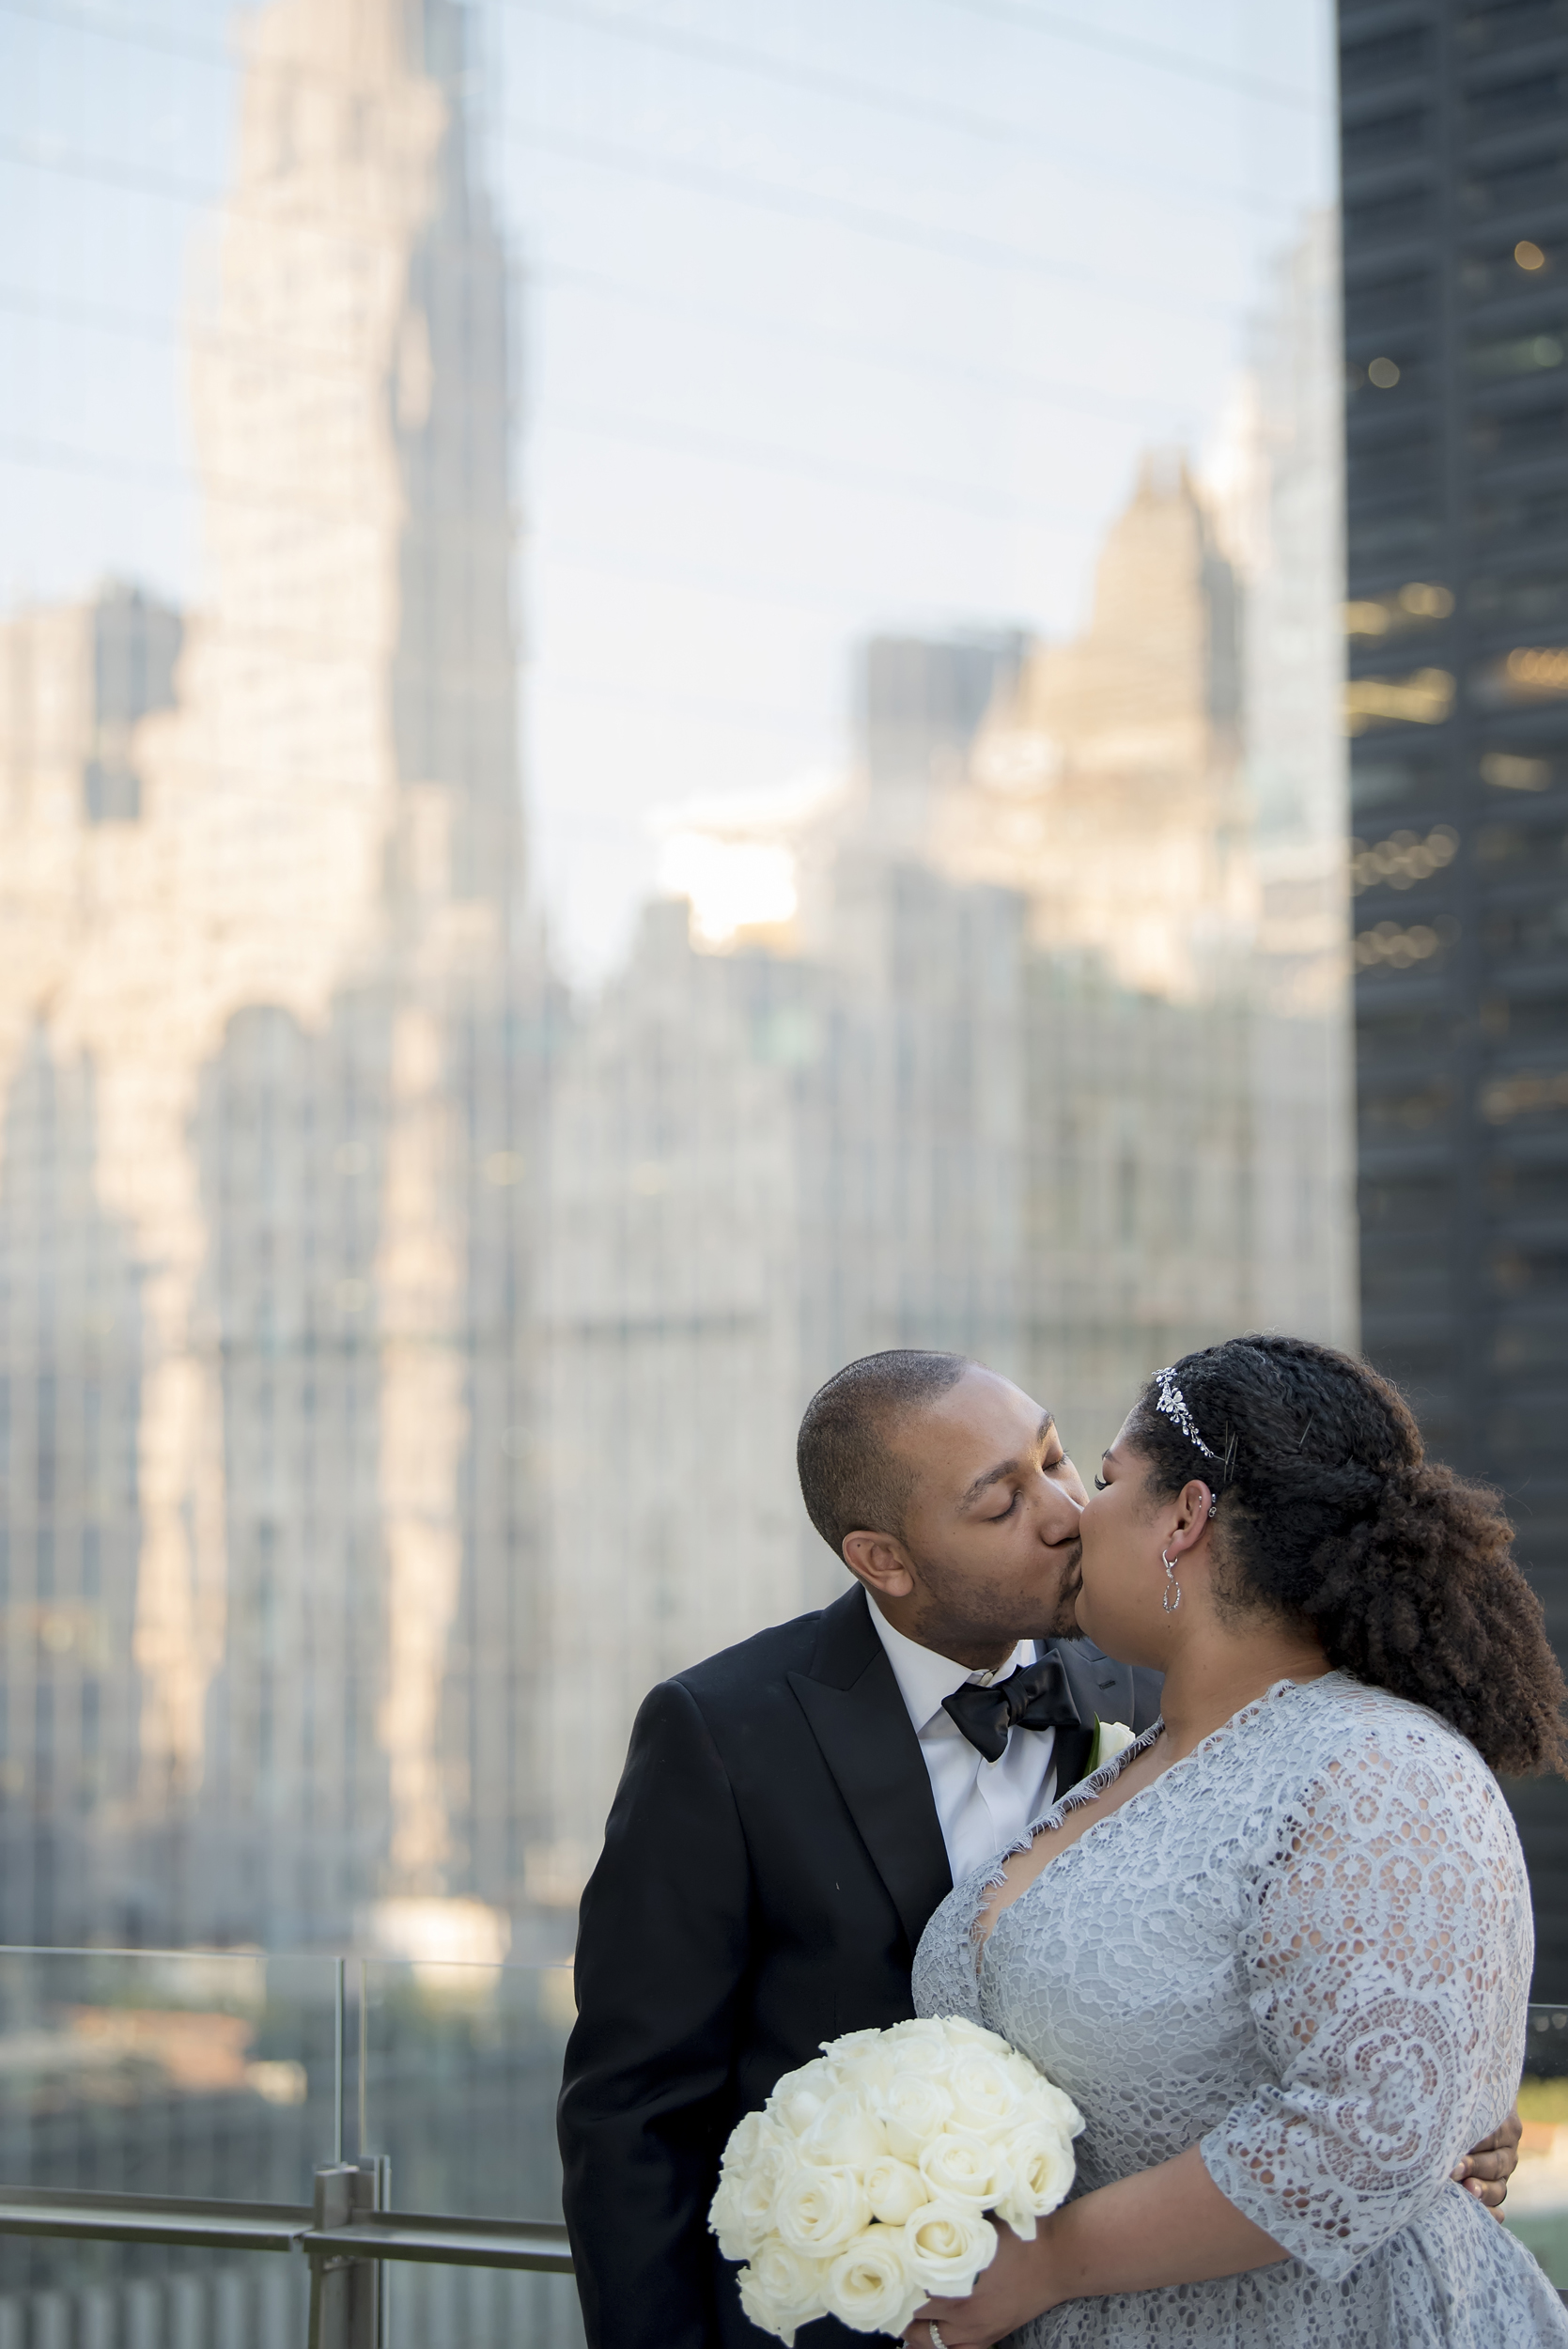 Bride wearing blue lace dress and holding a bouquet of roses kiss on a rooftop with a skyline reflected in the skyscrapers behind them in a photo by Studio A Images